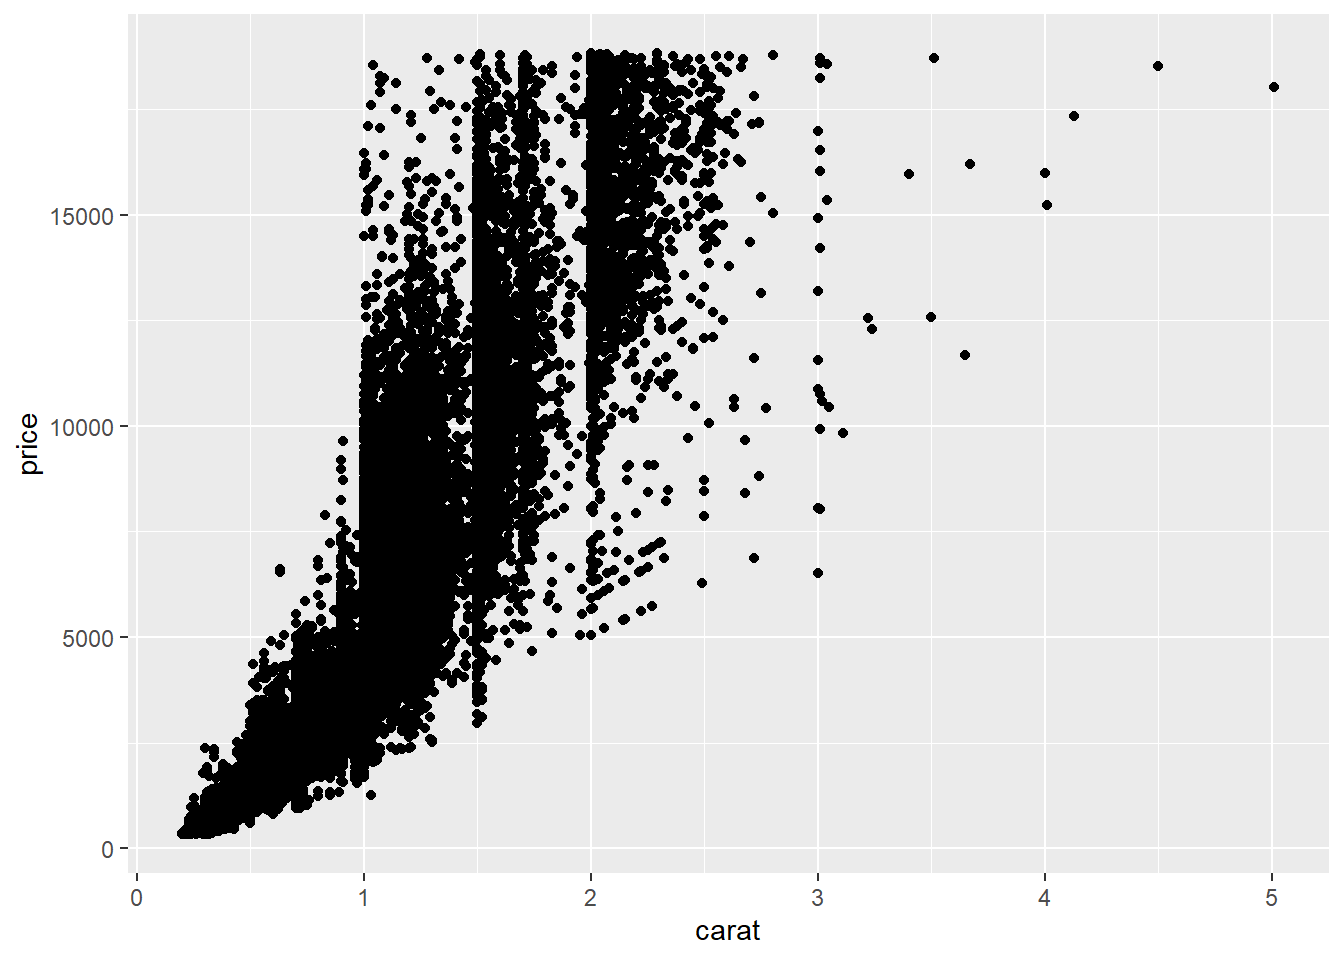 A ggplot object with a geom_point layer, the price of diamonds by their carat